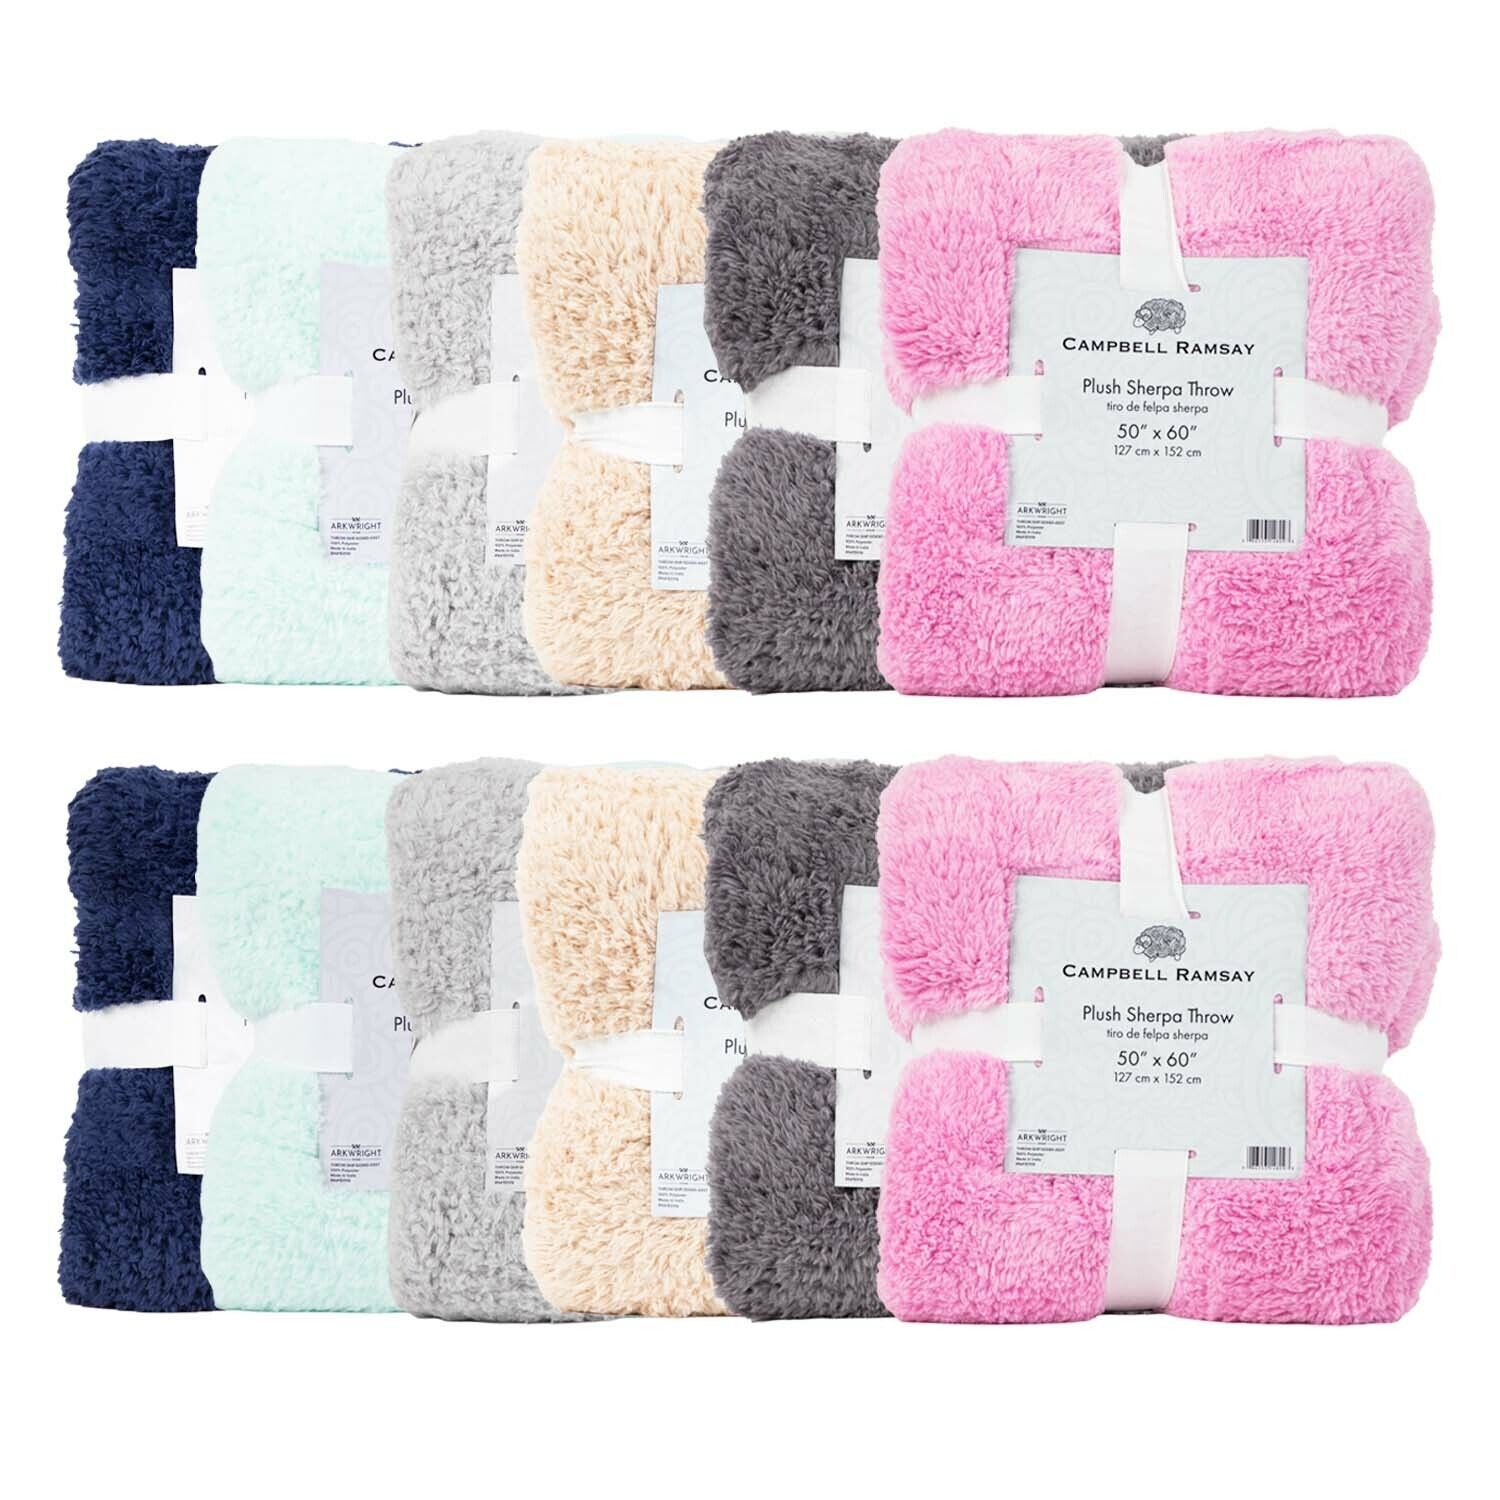 12 Pack of Plush Sherpa Throw Blankets, 50x60, 6 Solid Colors (2 of Each), Soft Campbell Ramsay Does Not Apply